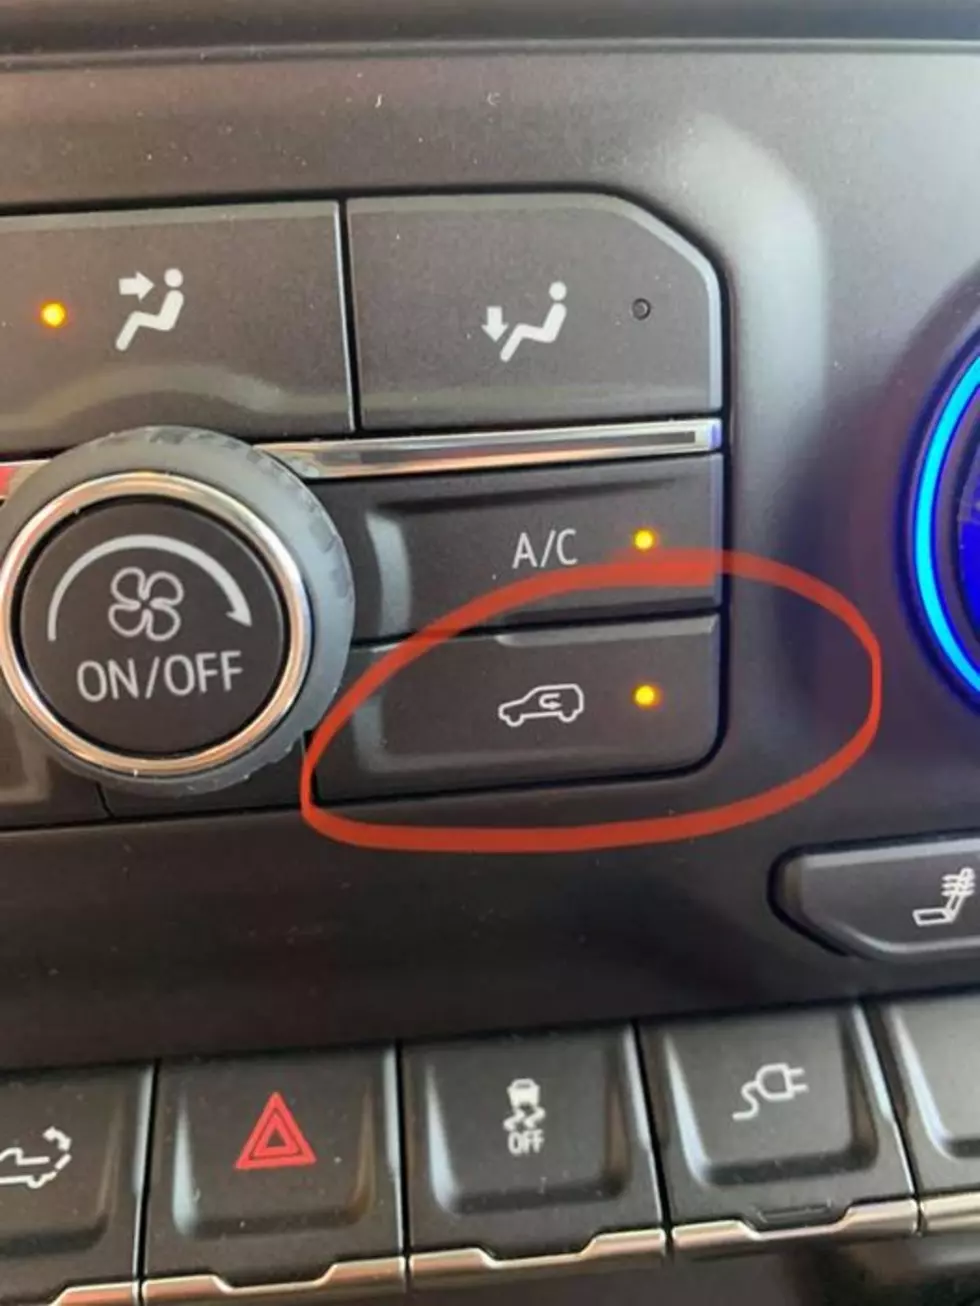 How Do I Get My Car’s Air Conditioner to Cool Better? Here Are a Few Tips